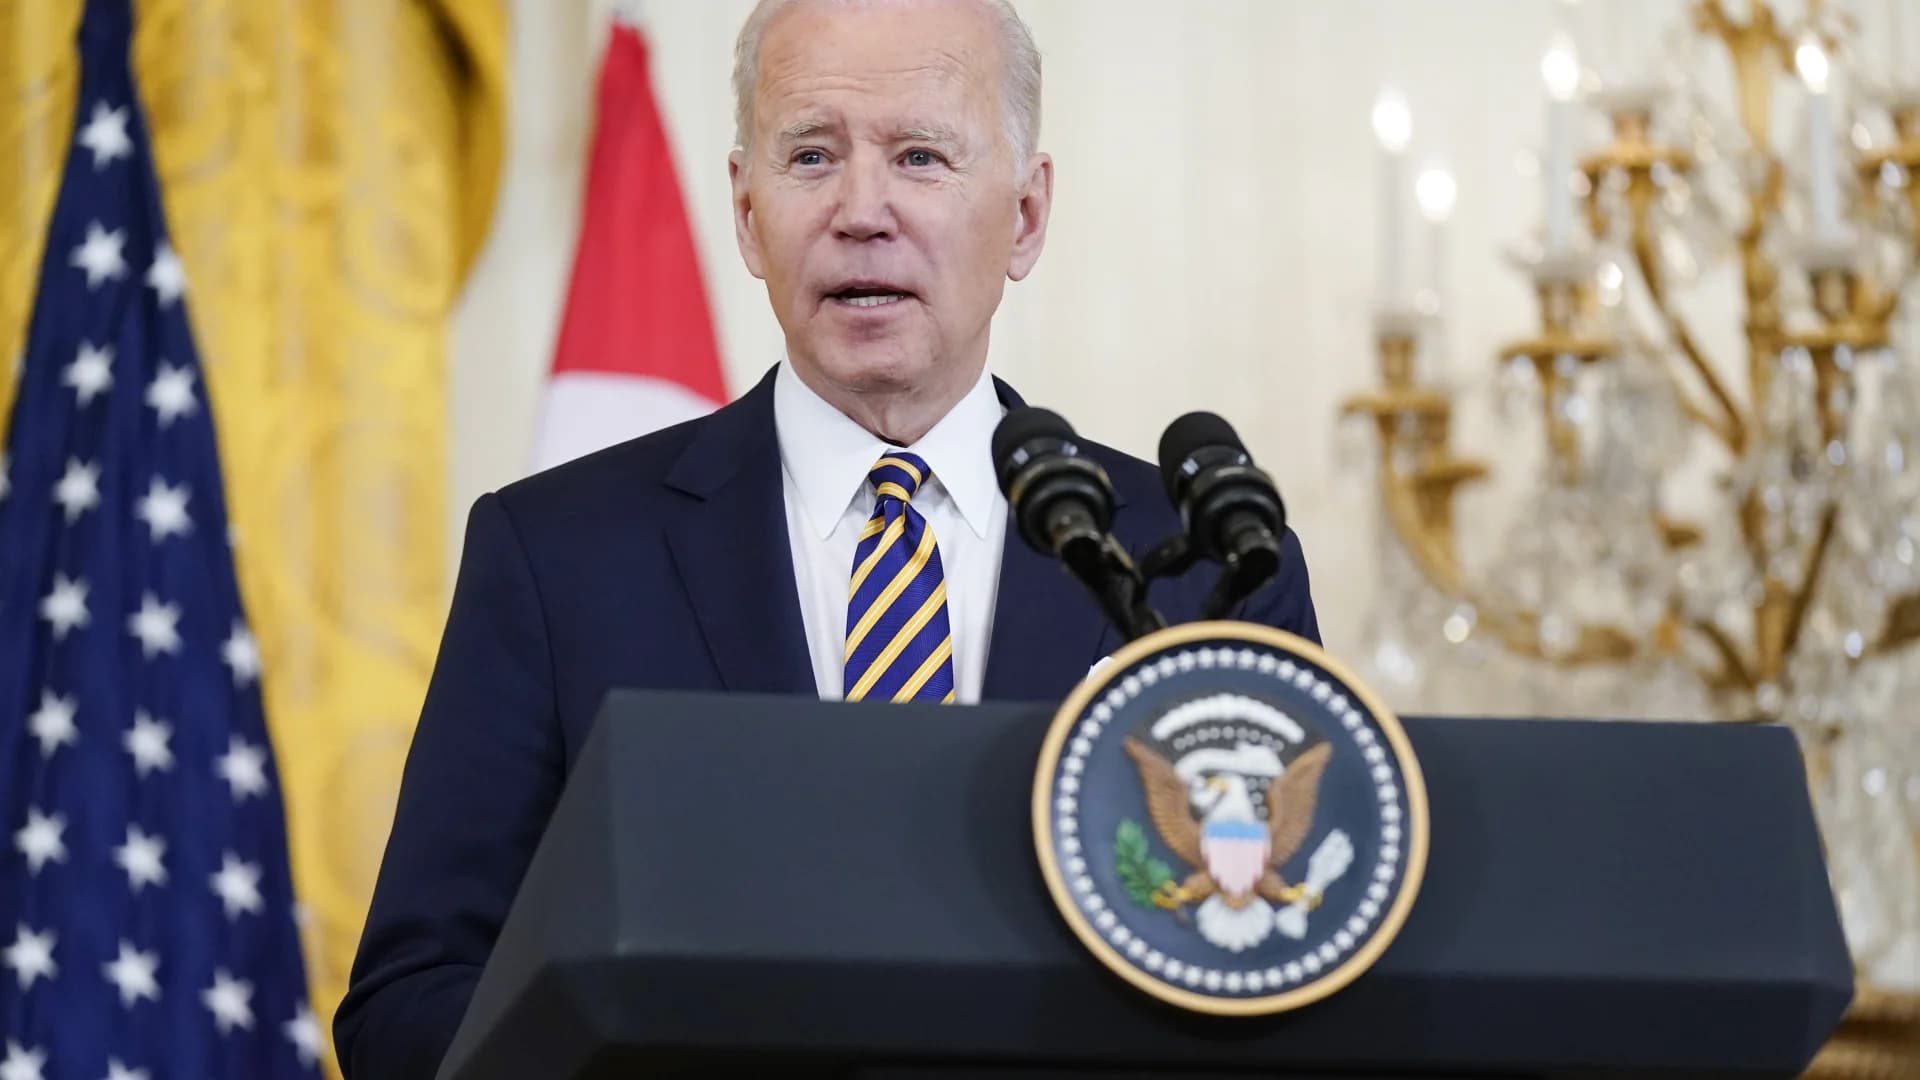 AP-NORC poll: Biden’s approval rating dips to 39%, lowest level of presidency